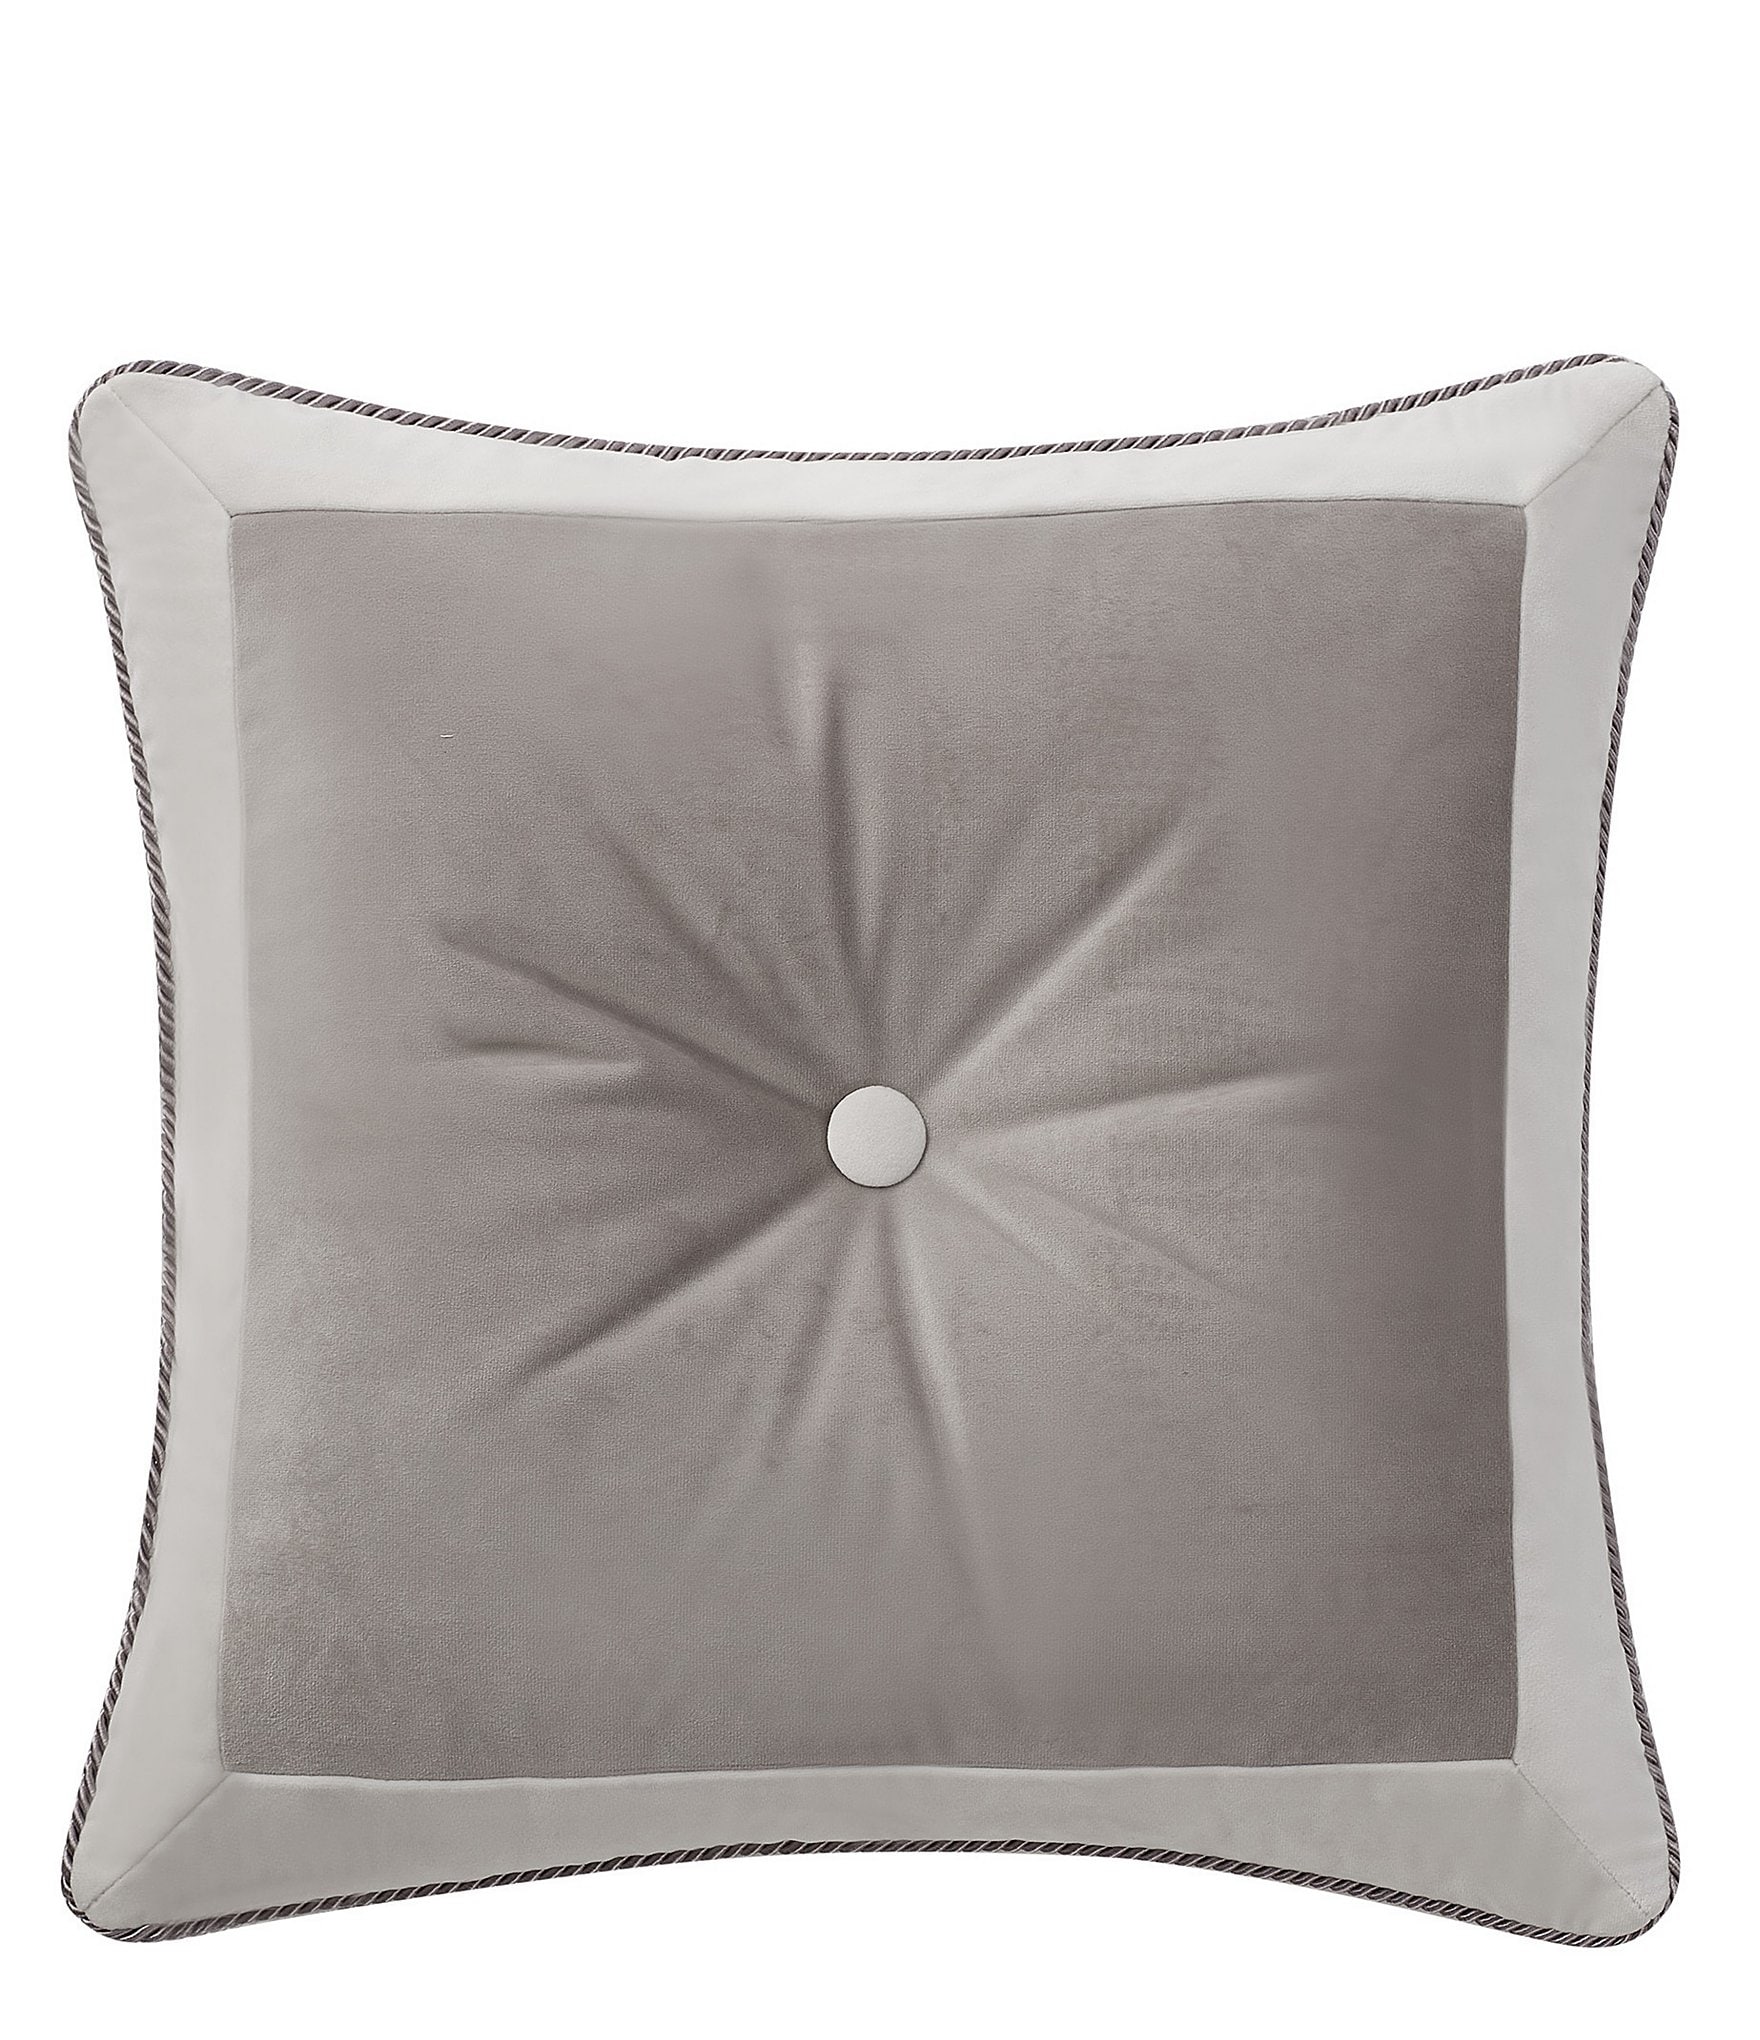 https://dimg.dillards.com/is/image/DillardsZoom/zoom/waterford-palace-collection-velvet-button-tufted-reversible-square-pillow/00000000_zi_c8f4bcd5-5851-48ed-95c3-f176c80bcffc.jpg